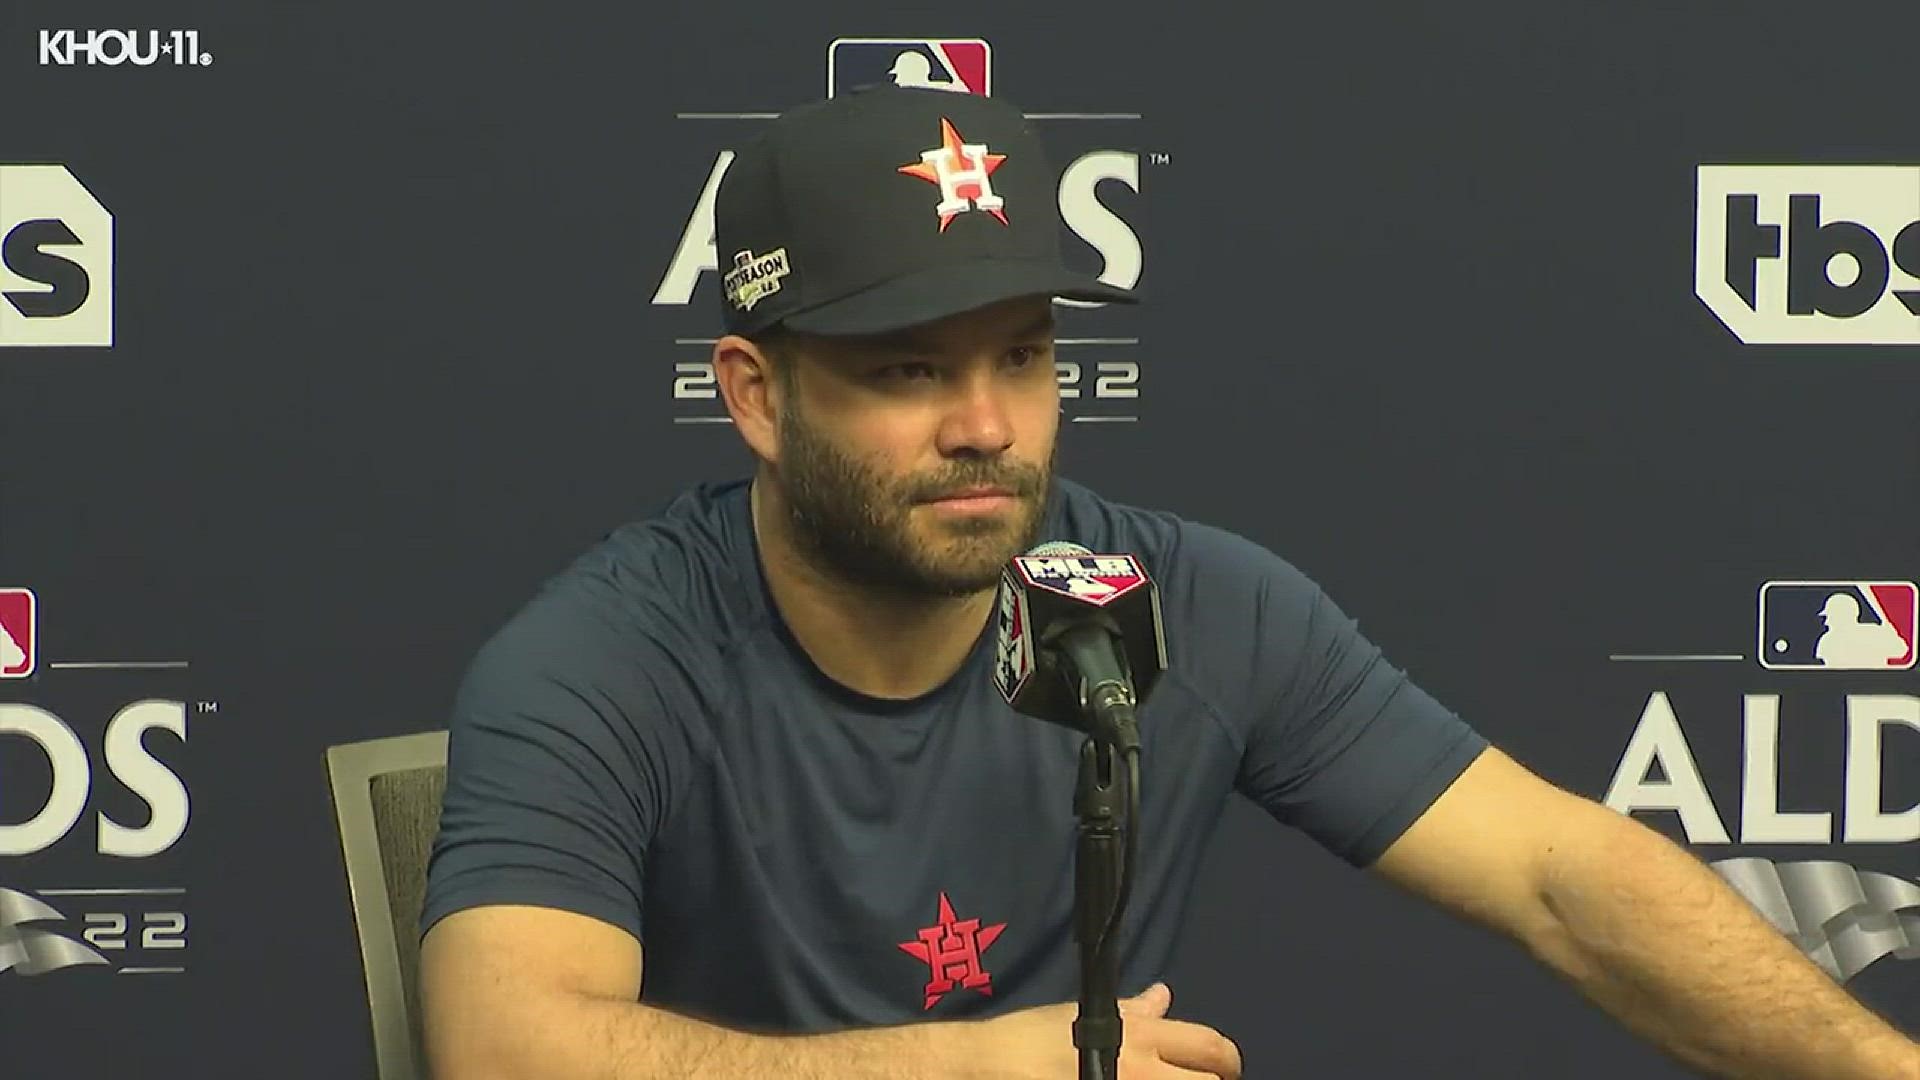 Astros 2B Jose Altuve on his love for the team, the fans and H-Town